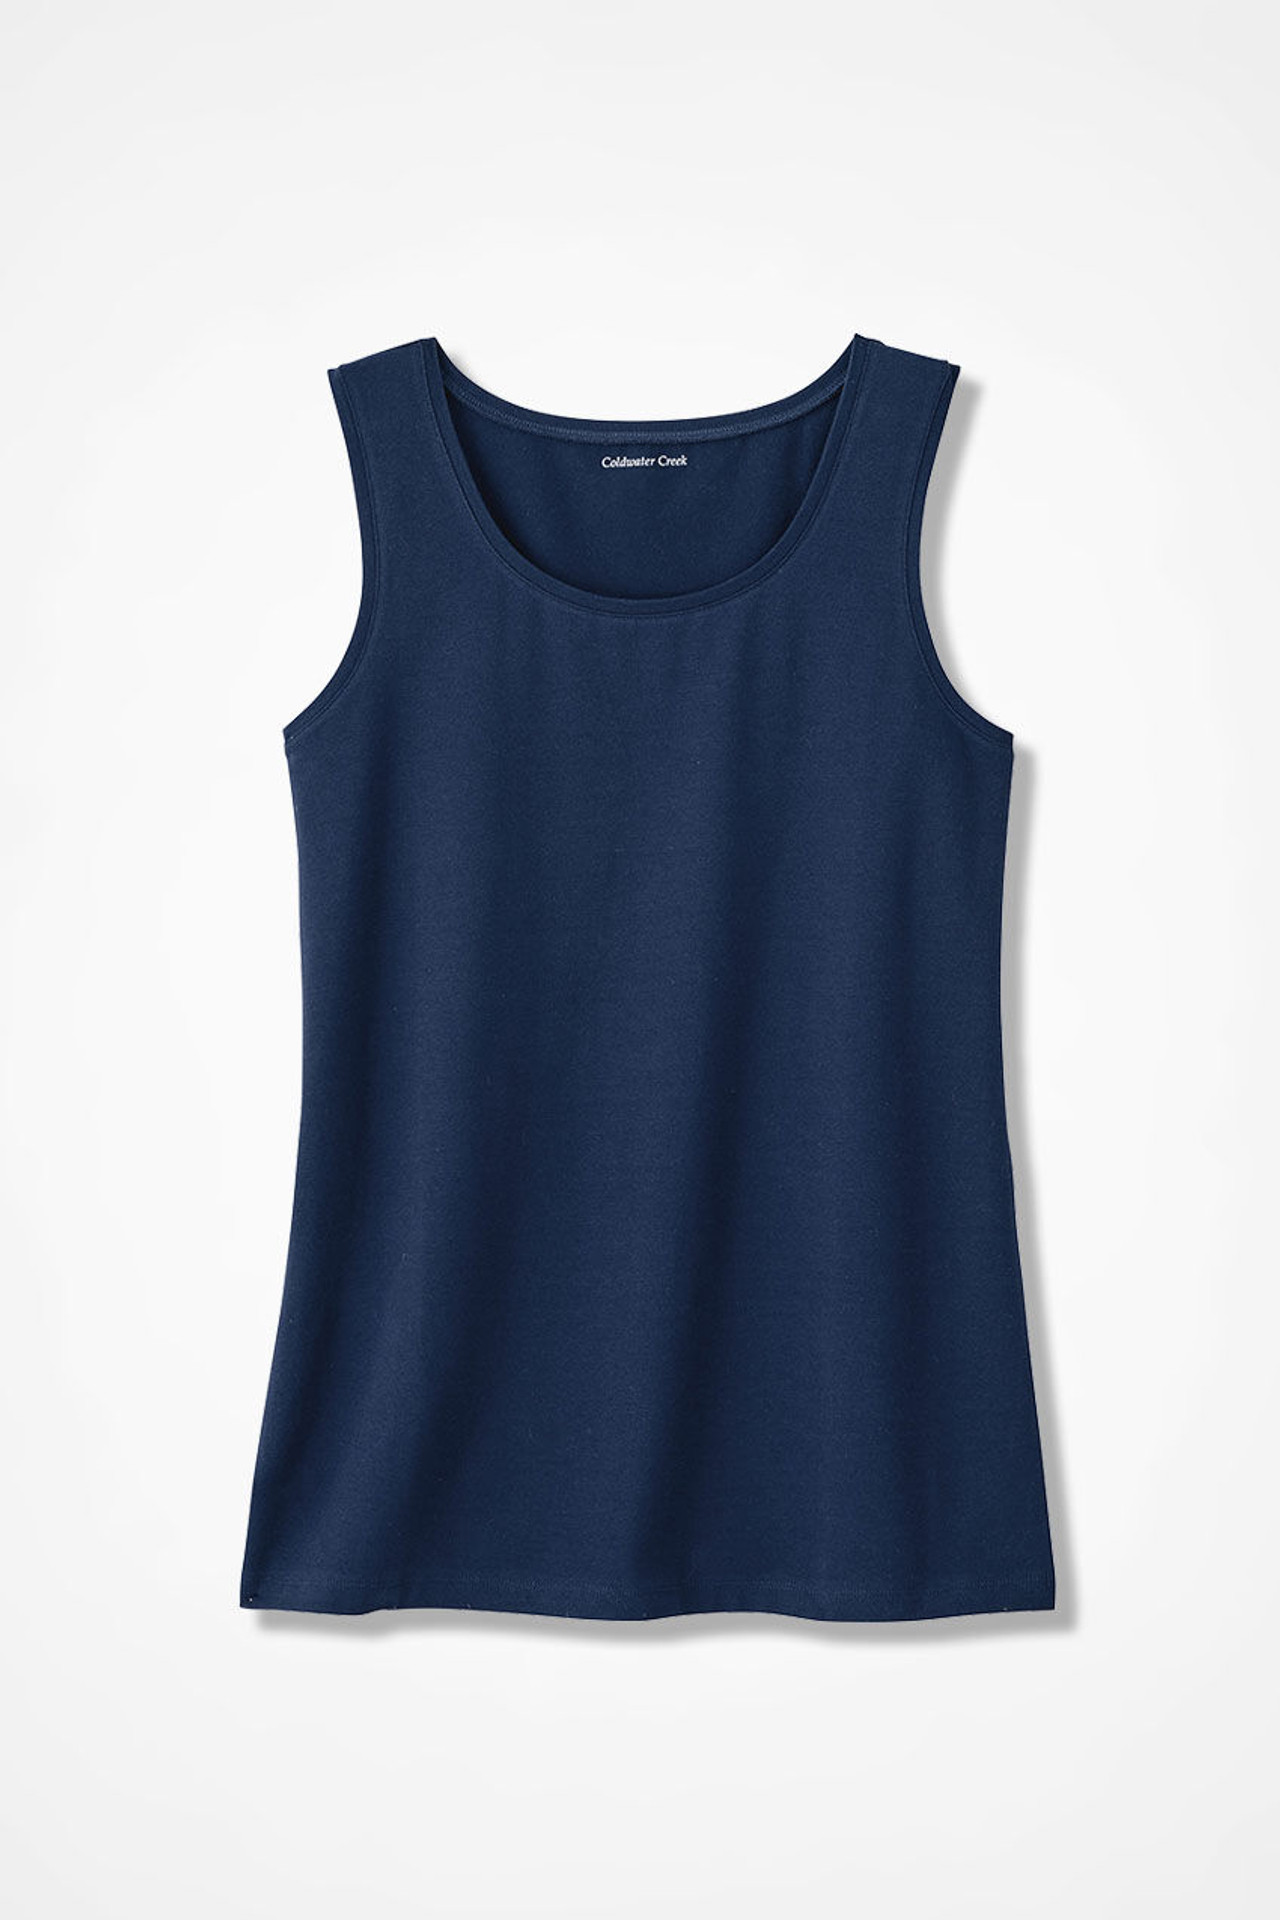 Love-the-Fit Tank